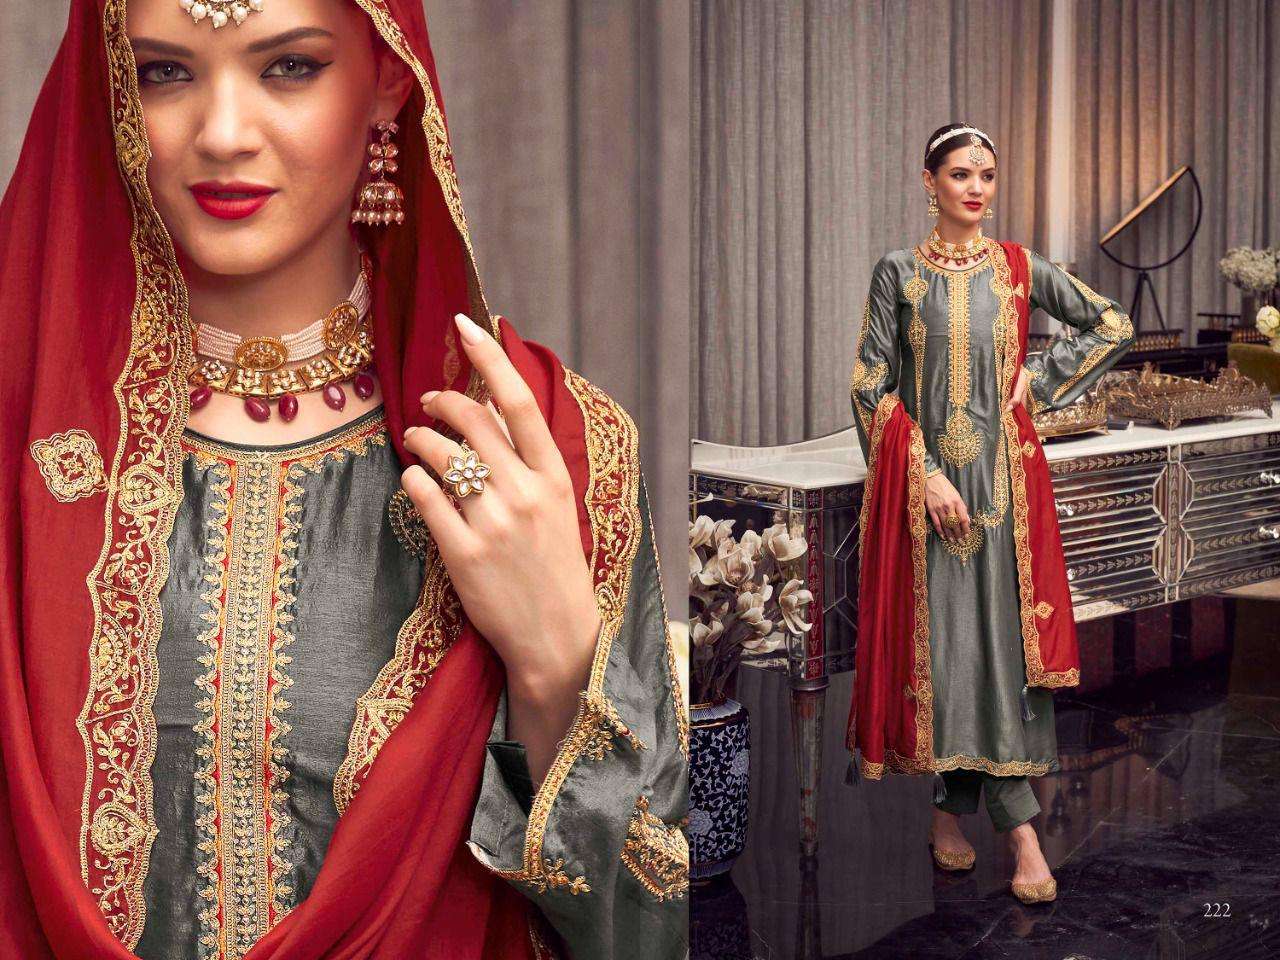 aiqa lifestyle hoonar 217-223 series party wear salwar suits collection wholesale price surat